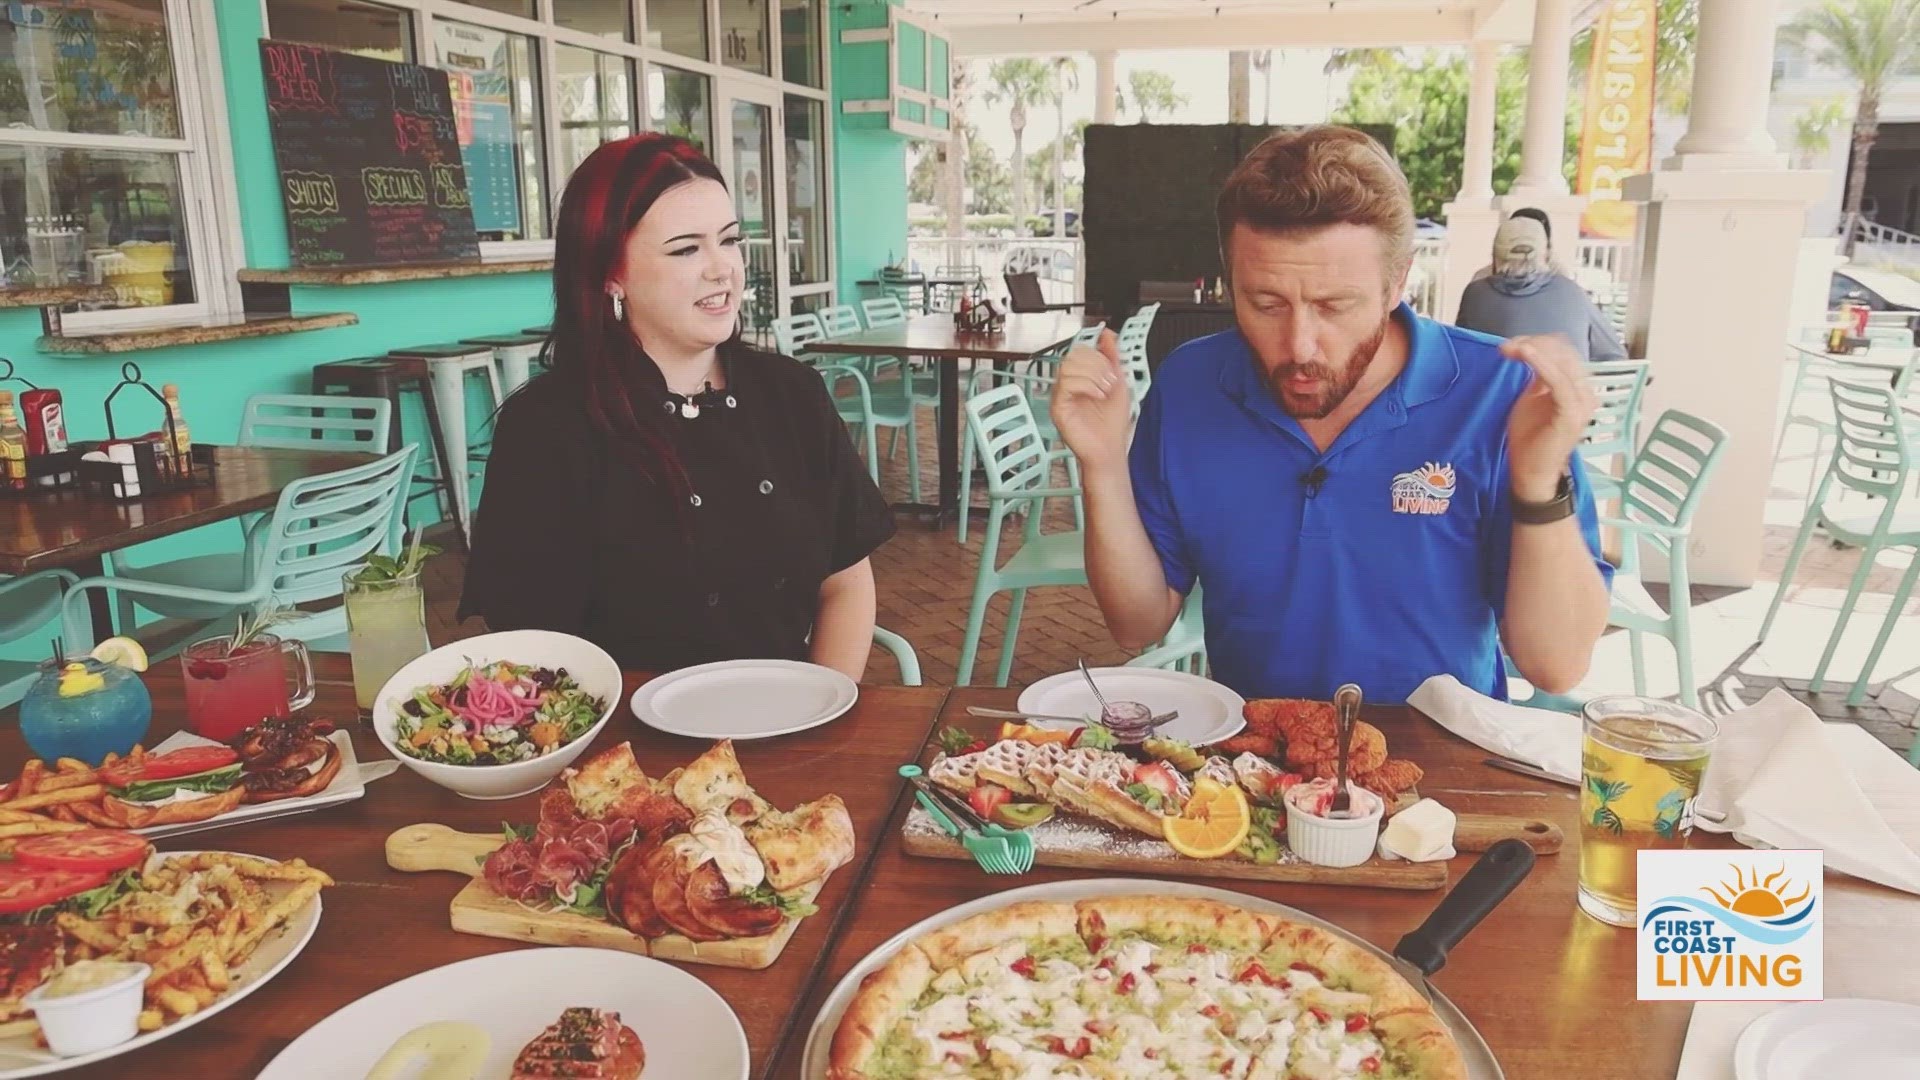 First Coast Foodies ventured over to Vilano Beach to check out Surfside Kitchen.